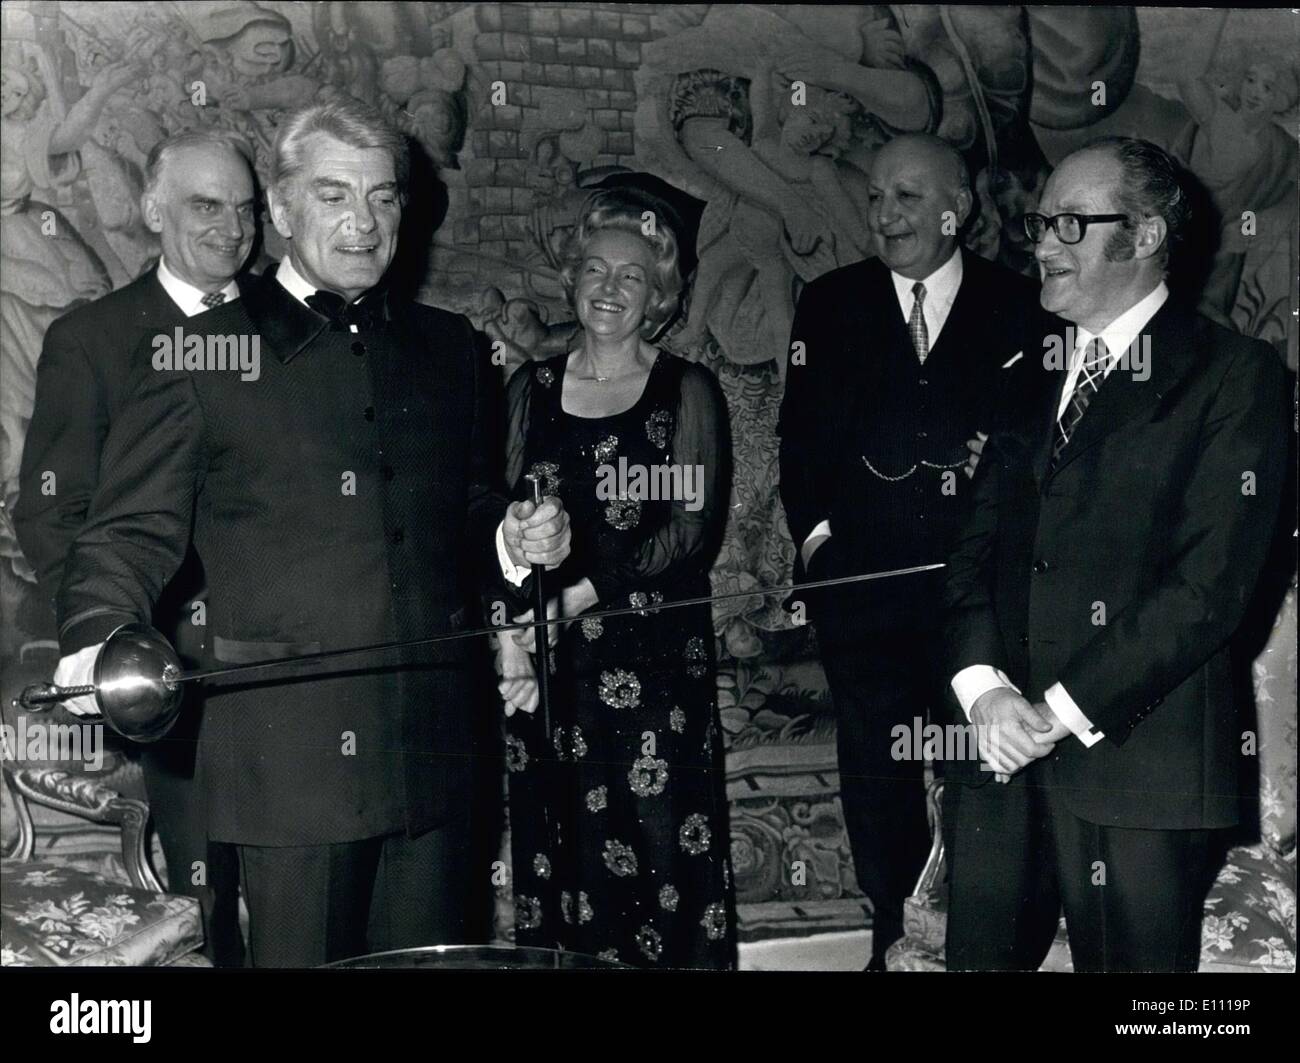 Mar. 14, 1975 - Jean Marais won the Alexandre Dumas Trophy for his interpretation of ''The Count of Monte Cristo.'' Left to right: Jean Marias, Dumas Trophy Jury President Juliette Benzoni, and Historian and Jury Member Alain Decaux. Stock Photo